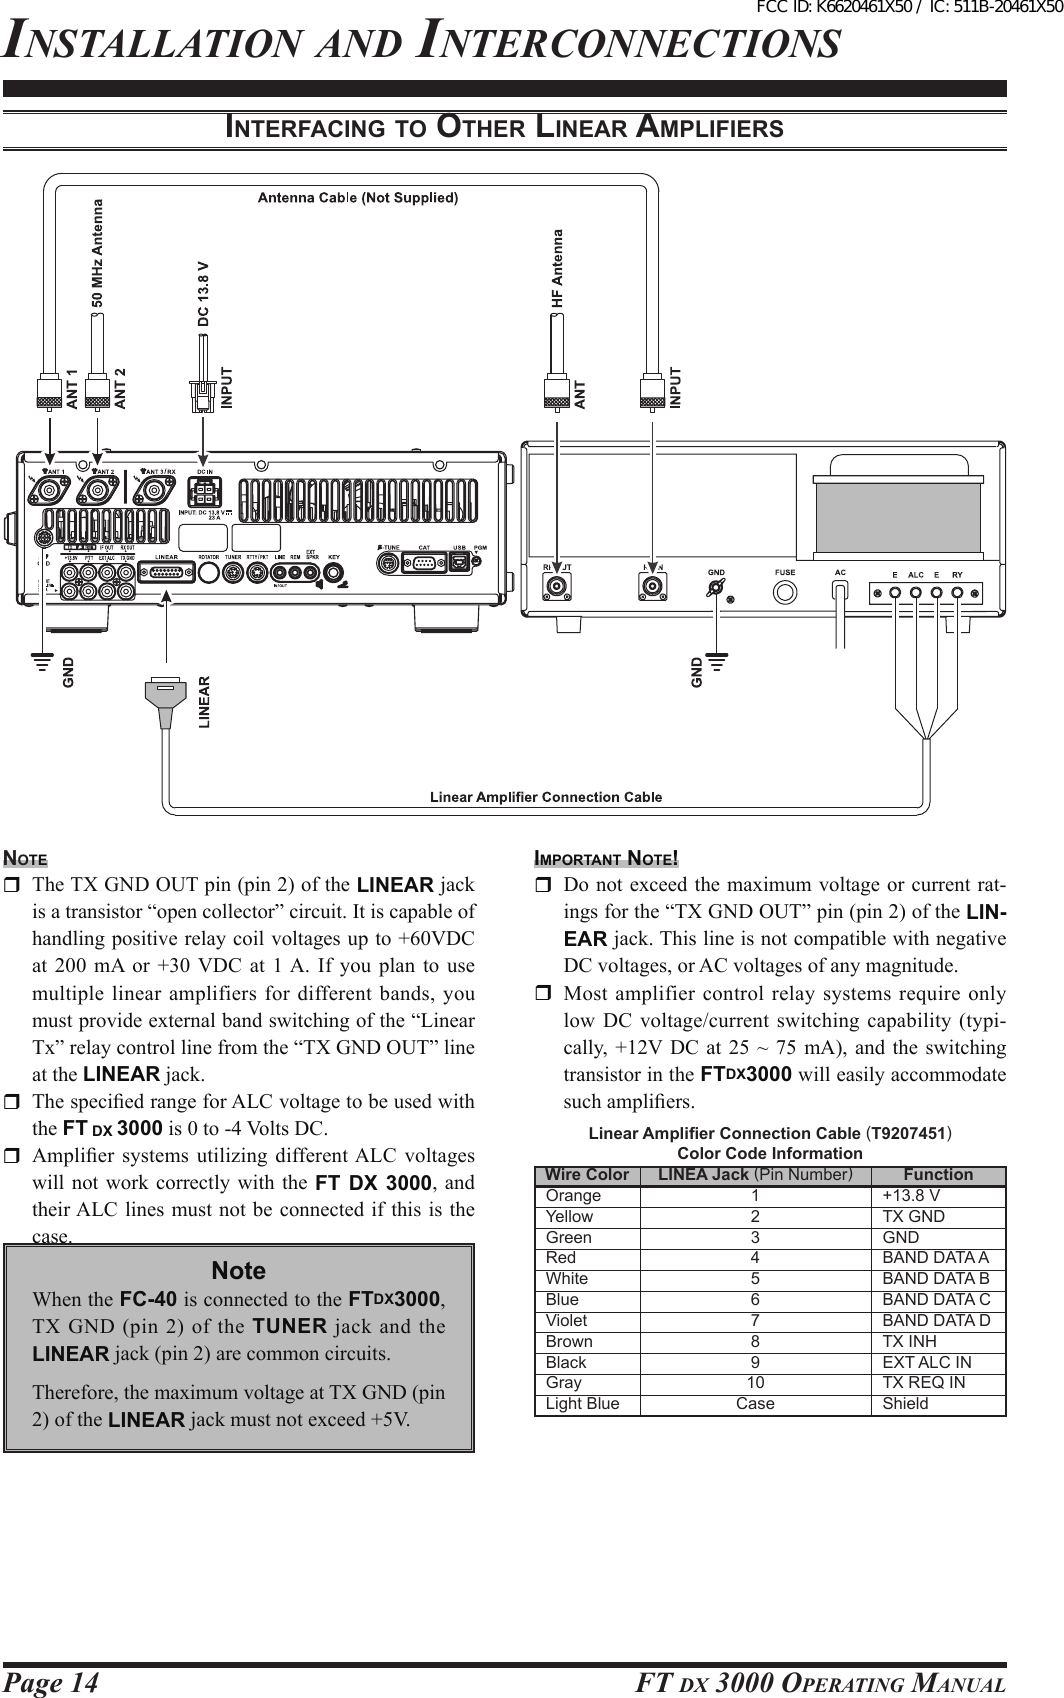 Page 14 FT DX 3000 OperaTing ManualinsTallaTiOn anD inTercOnnecTiOnsinterFAcing to other lineAr AMpliFierSnote  The TX GND OUT pin (pin 2) of the LINEAR jack is a transistor “open collector” circuit. It is capable of handling positive relay coil voltages up to +60VDC at  200  mA  or  +30  VDC  at  1 A.  If  you  plan  to  use multiple linear  amplifiers for  different bands, you must provide external band switching of the “Linear Tx” relay control line from the “TX GND OUT” line at the LINEAR jack.  The specied range for ALC voltage to be used with the FT DX 3000 is 0 to -4 Volts DC.  Amplier  systems  utilizing  different ALC  voltages will not work  correctly  with  the  FT  DX  3000, and their ALC lines must not be connected if this is  the case.iMportAnt note!  Do  not exceed the maximum voltage or current rat-ings for the “TX GND OUT” pin (pin 2) of the LIN-EAR jack. This line is not compatible with negative DC voltages, or AC voltages of any magnitude.  Most  amplifier control relay systems require  only low DC voltage/current switching capability (typi-cally, +12V DC  at  25  ~  75 mA), and  the  switching transistor in the FTDX3000 will easily accommodate such ampliers.Wire ColorOrangeYellowGreenRedWhiteBlueVioletBrownBlackGrayLight BlueLINEA Jack (Pin Number)12345678910CaseFunction+13.8 VTX GNDGNDBAND DATA ABAND DATA BBAND DATA CBAND DATA DTX INHEXT ALC INTX REQ INShieldLinear Amplier Connection Cable (T9207451)Color Code InformationNoteWhen the FC-40 is connected to the FTDX3000, TX  GND  (pin  2)  of  the  TUNER jack  and  the LINEAR jack (pin 2) are common circuits.Therefore, the maximum voltage at TX GND (pin 2) of the LINEAR jack must not exceed +5V. FCC ID: K6620461X50 / IC: 511B-20461X50